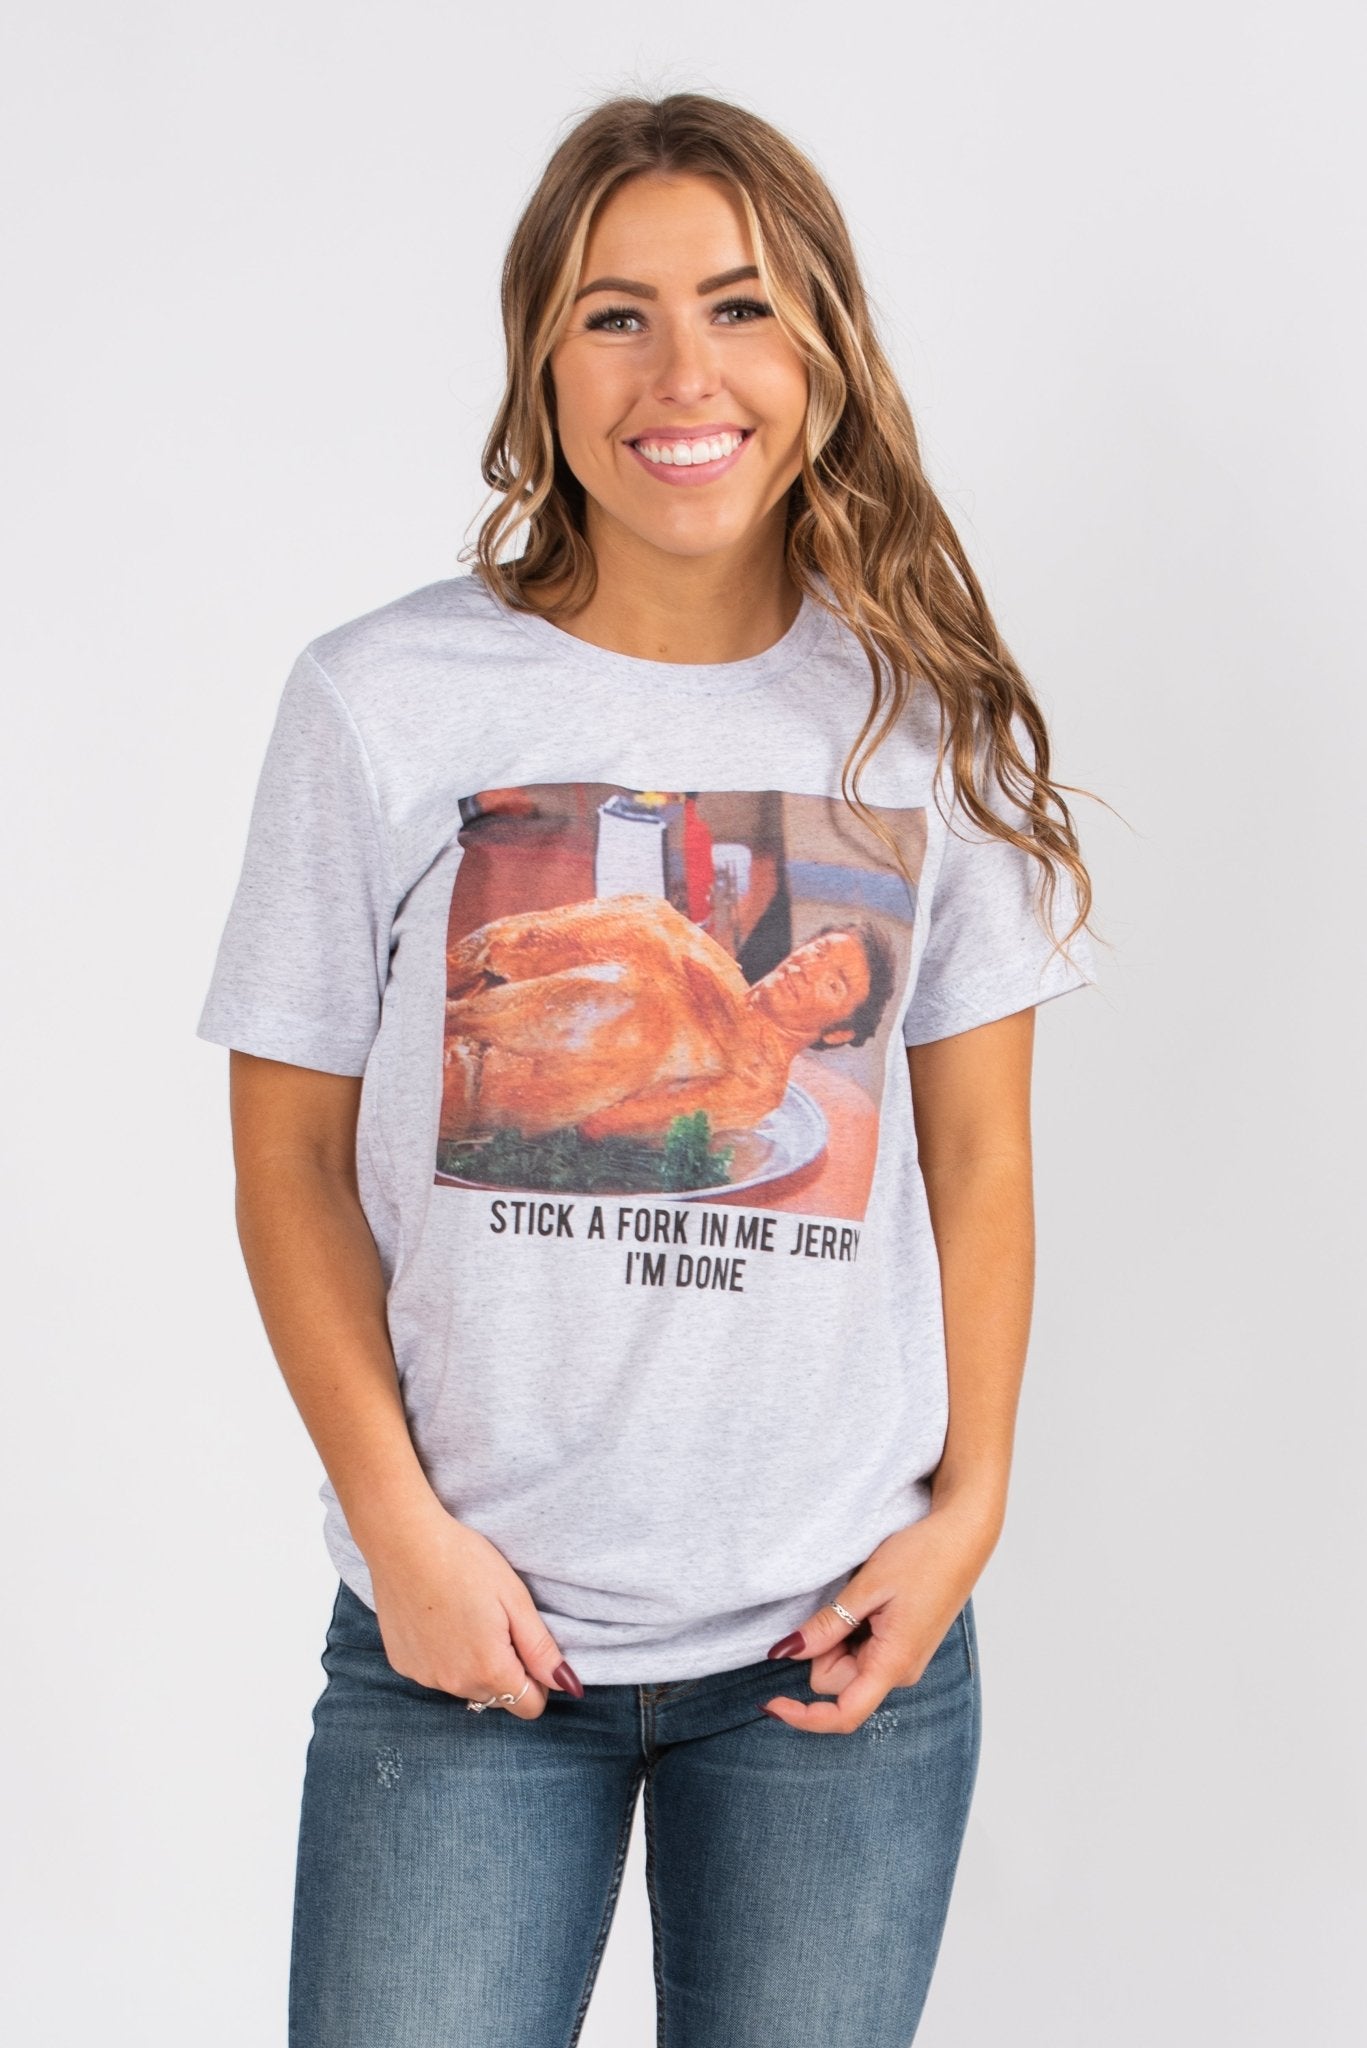 Seinfeld Stick a Fork In Me unisex short sleeve t-shirt - Stylish T-shirts - Trendy Graphic T-Shirts and Tank Tops at Lush Fashion Lounge Boutique in Oklahoma City